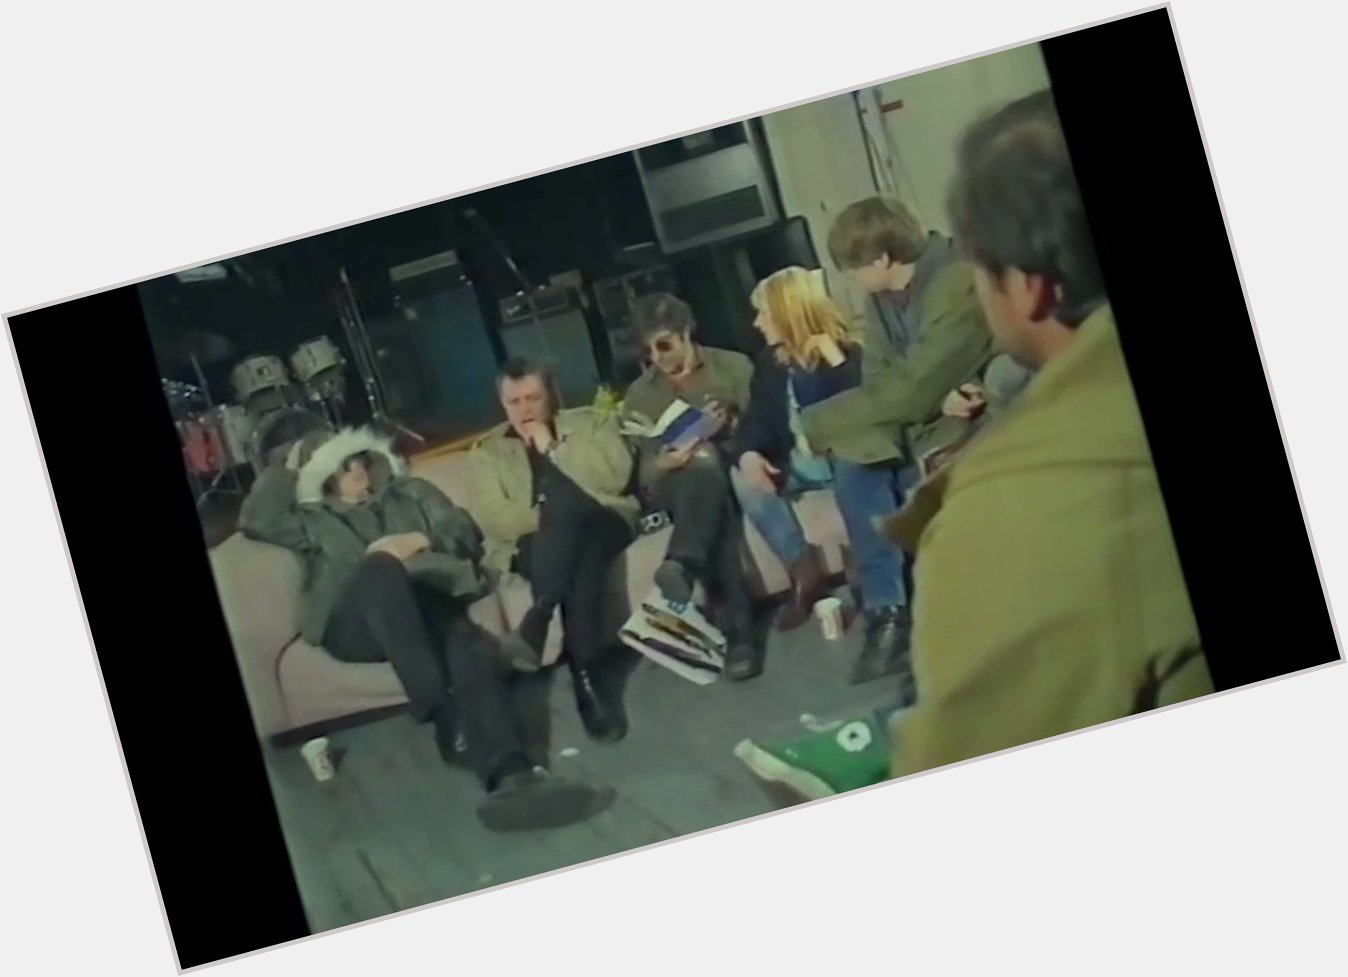 Happy birthday to Thurston Moore. Here are Sonic Youth with Teen Age Riot, taped off Snub TV in Jan 89
